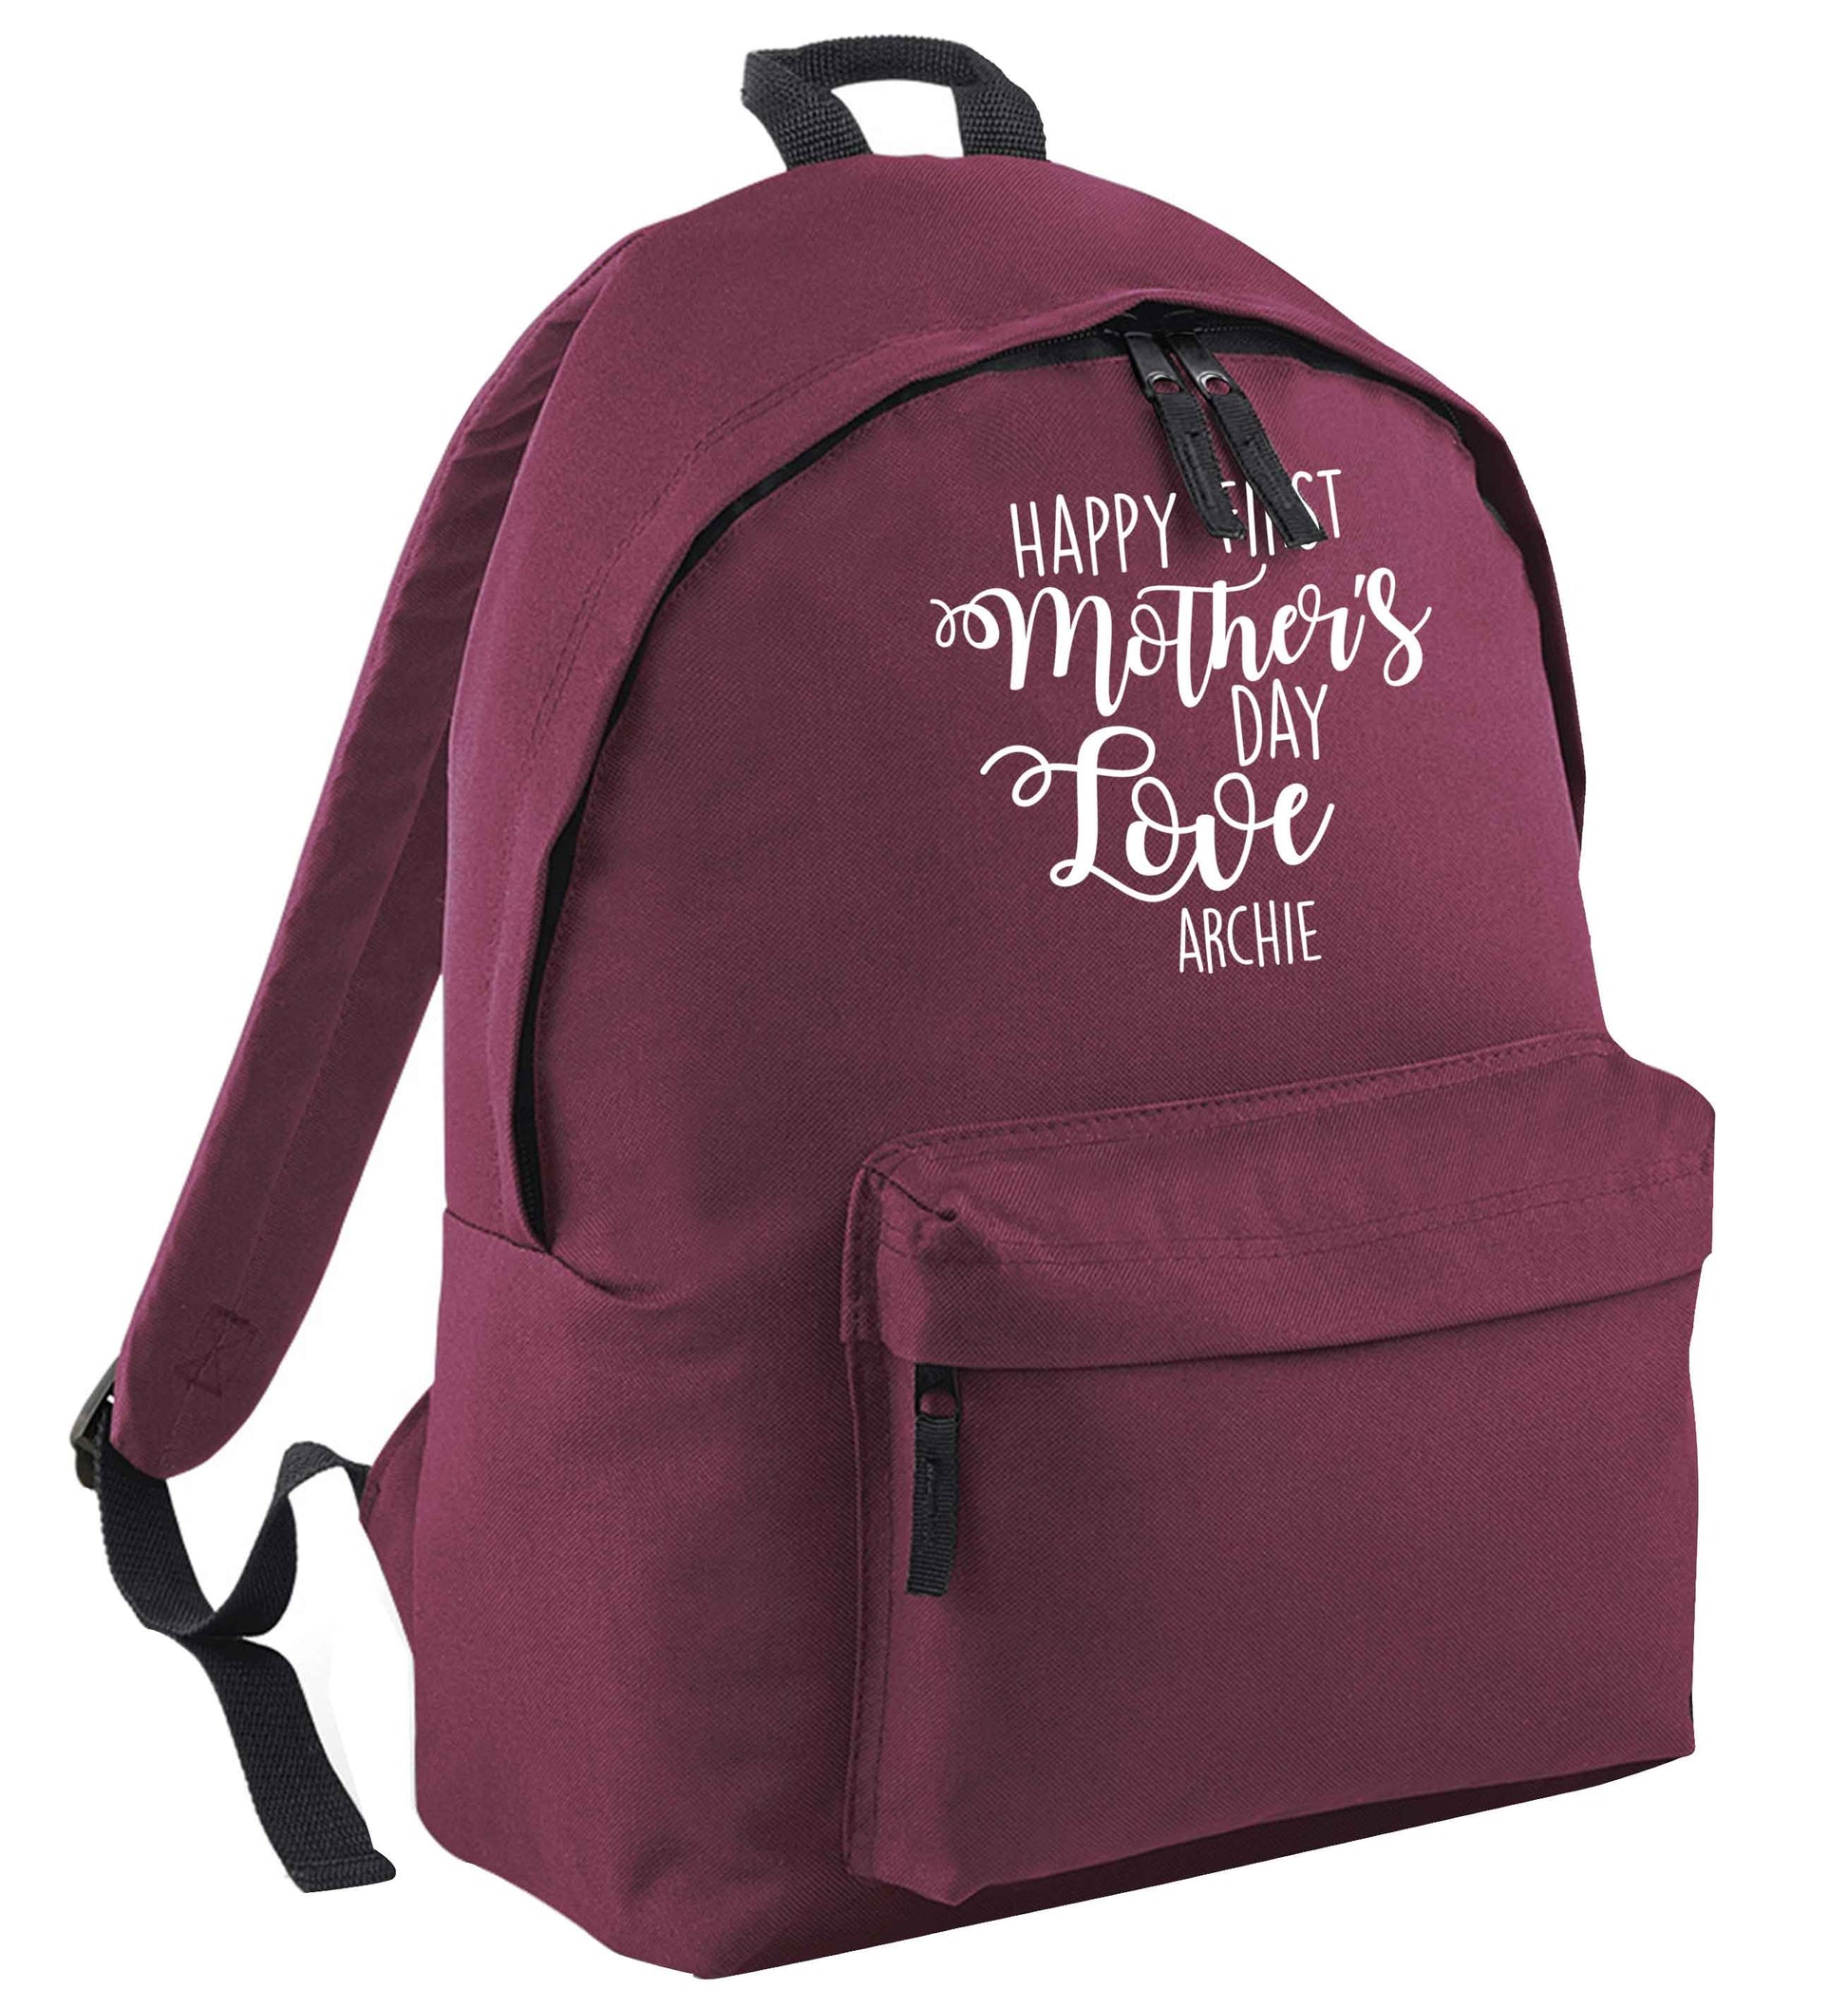 Mummy's first mother's day! black adults backpack